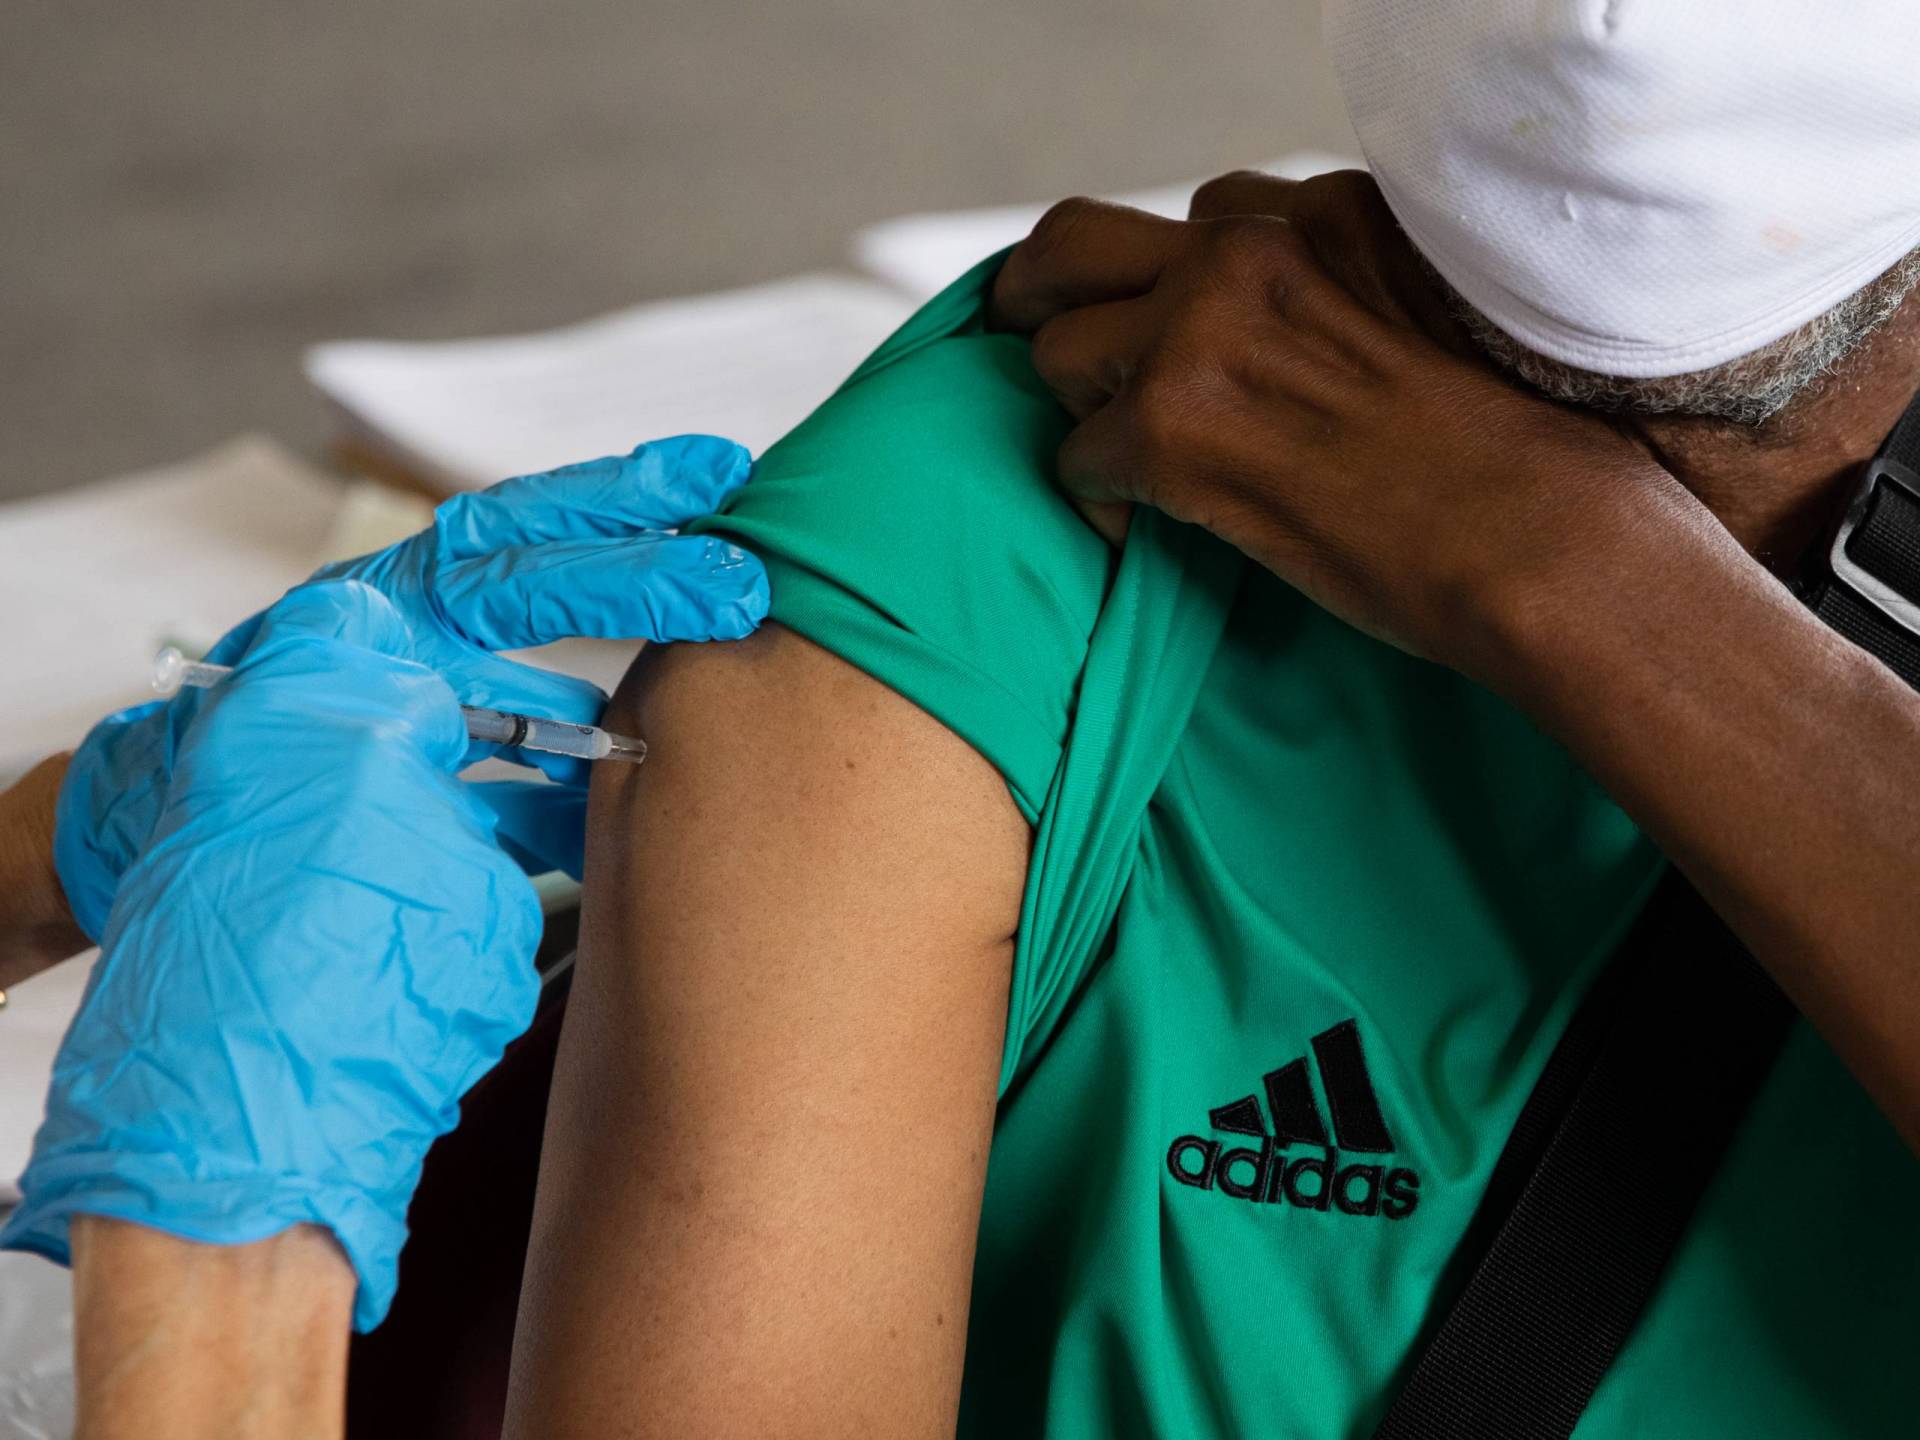 Blue-gloved hands give a vaccine in one shoulder.